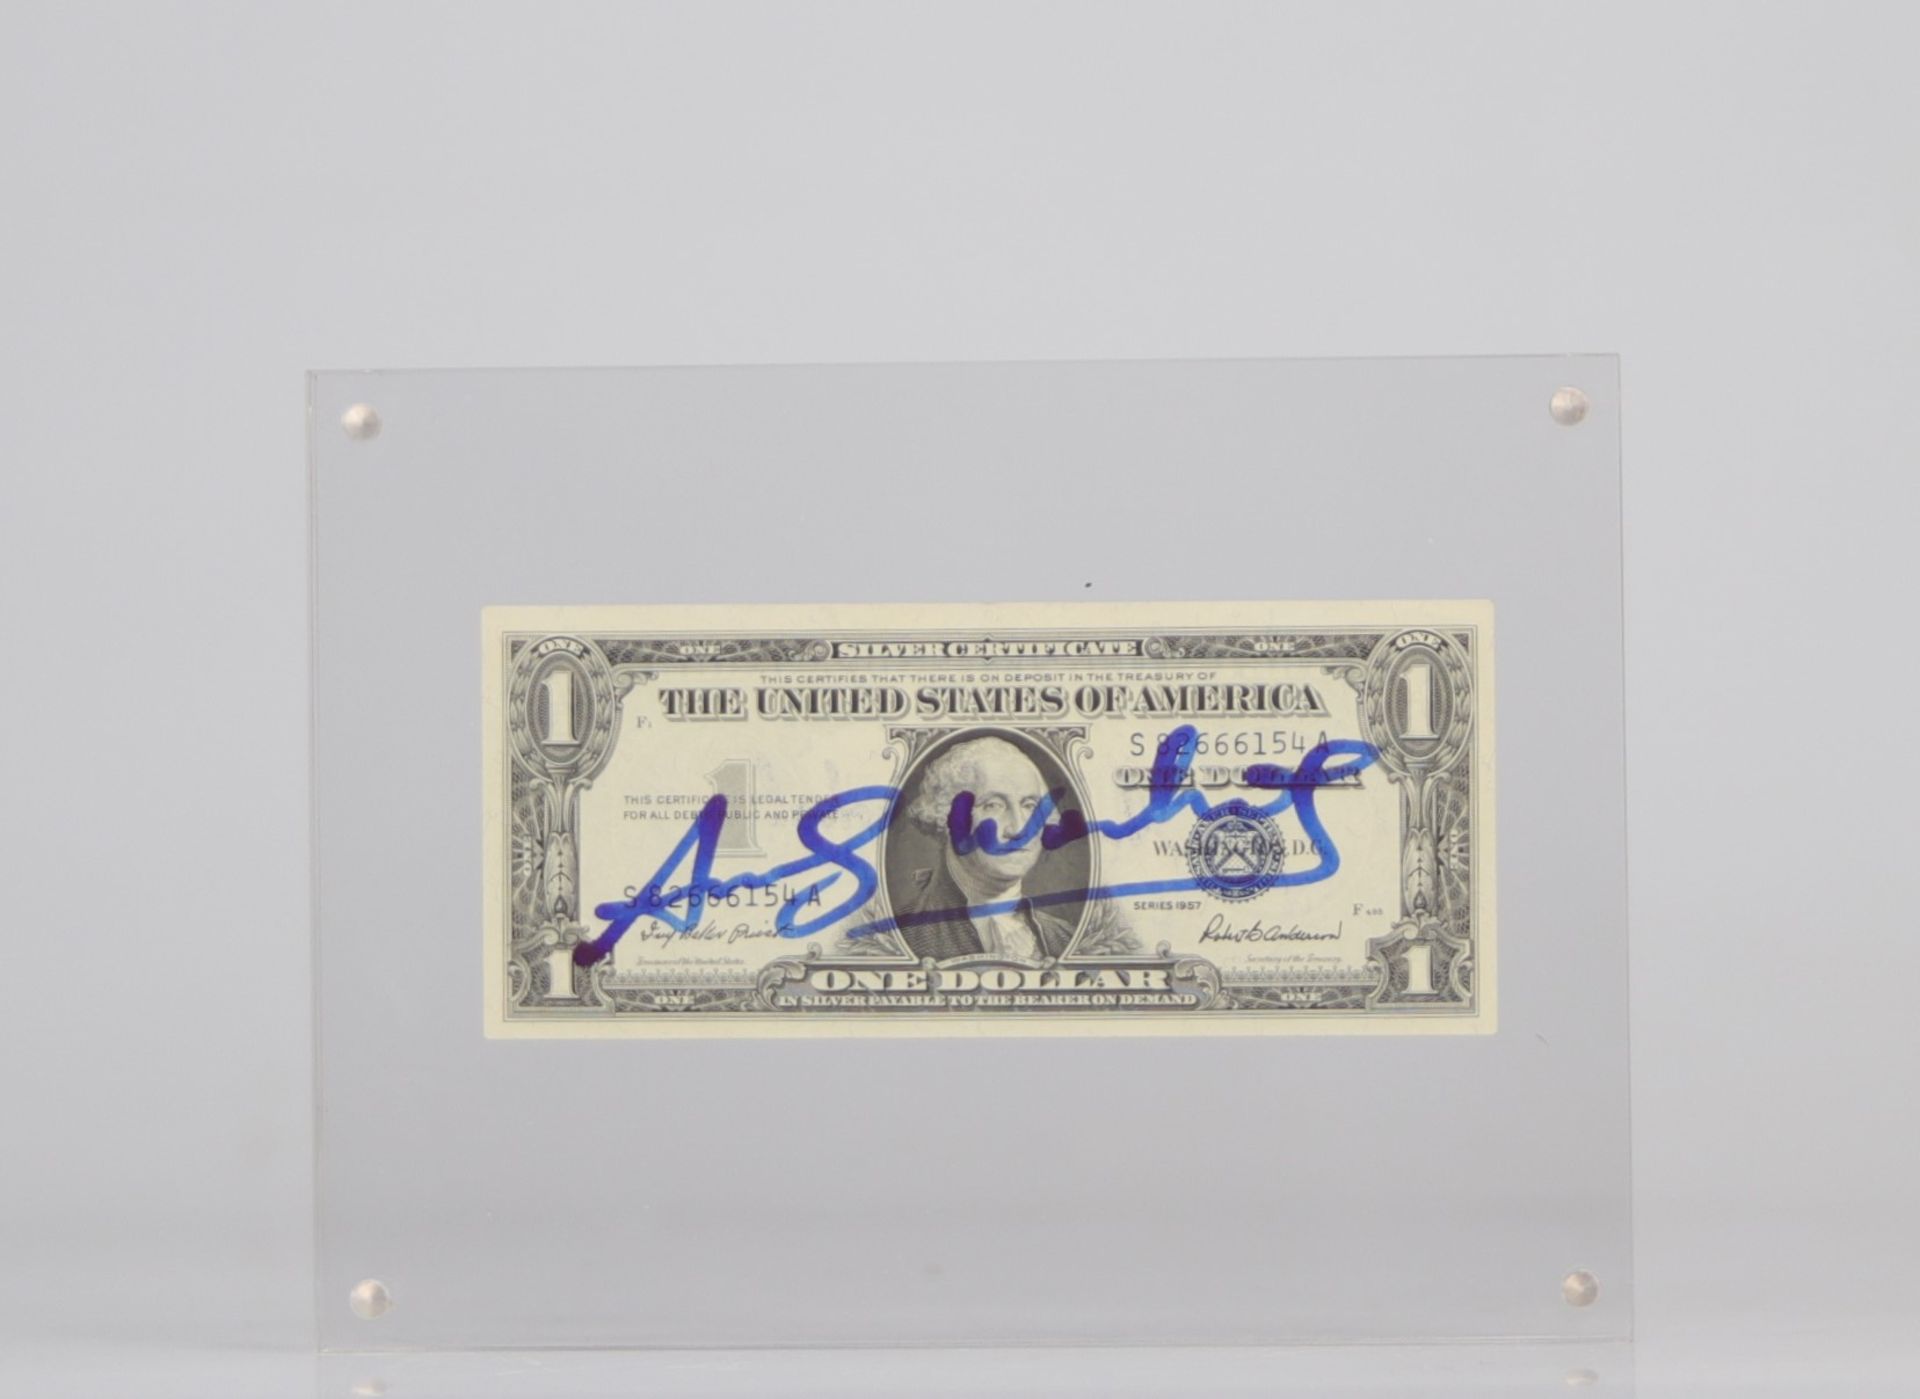 Andy Warhol. 1 dollar bill embellished with the signature of "Andy Warhol" in felt pen.